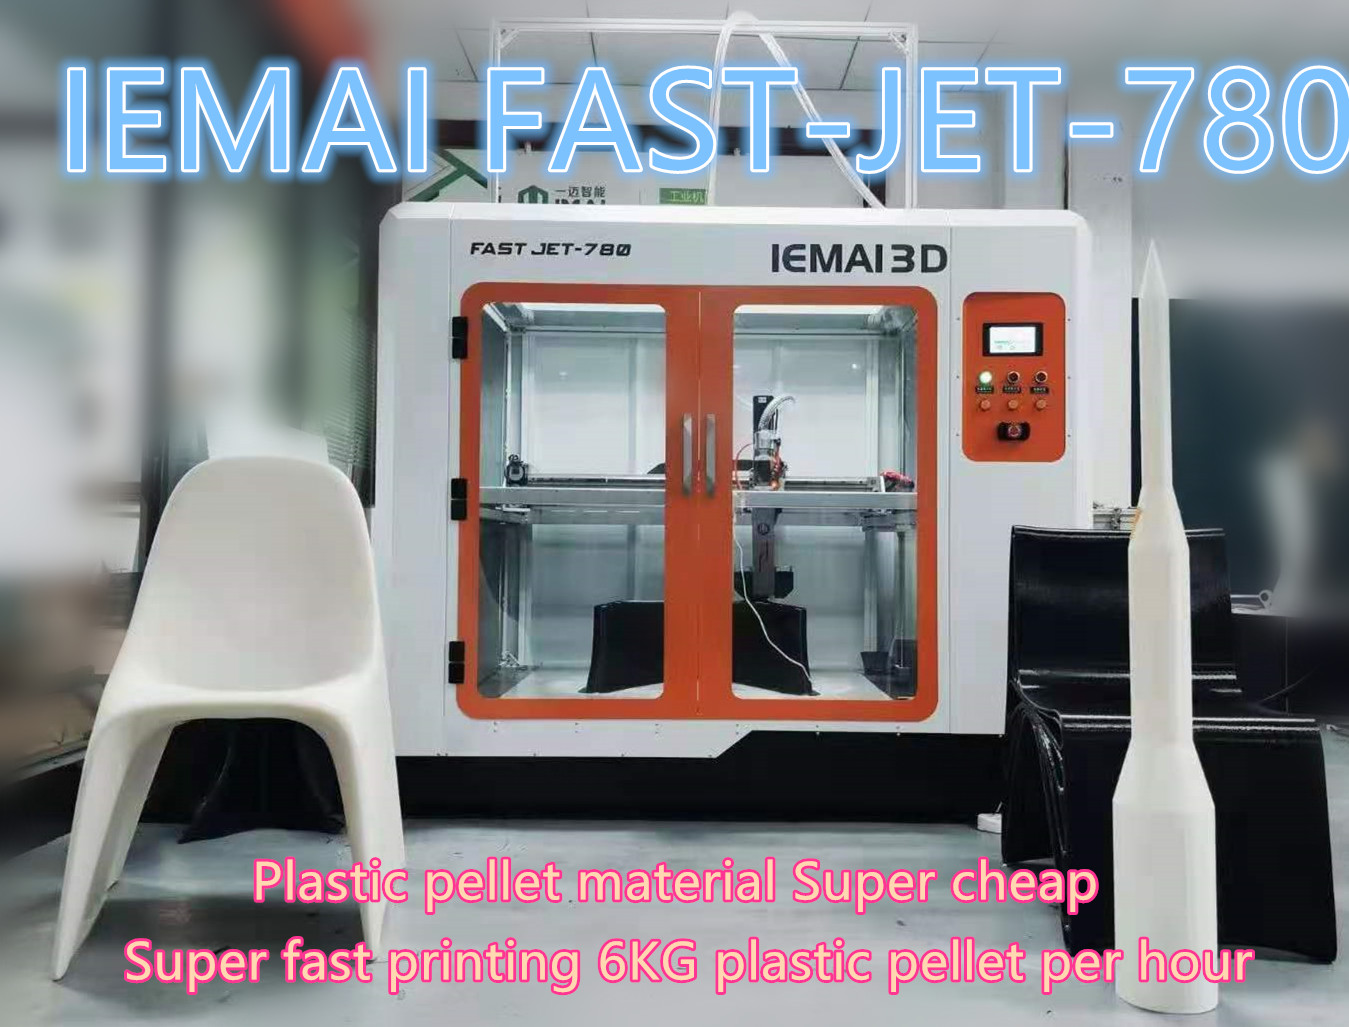 IEMAI Industrial Large Format 3d Printer for  Furniture